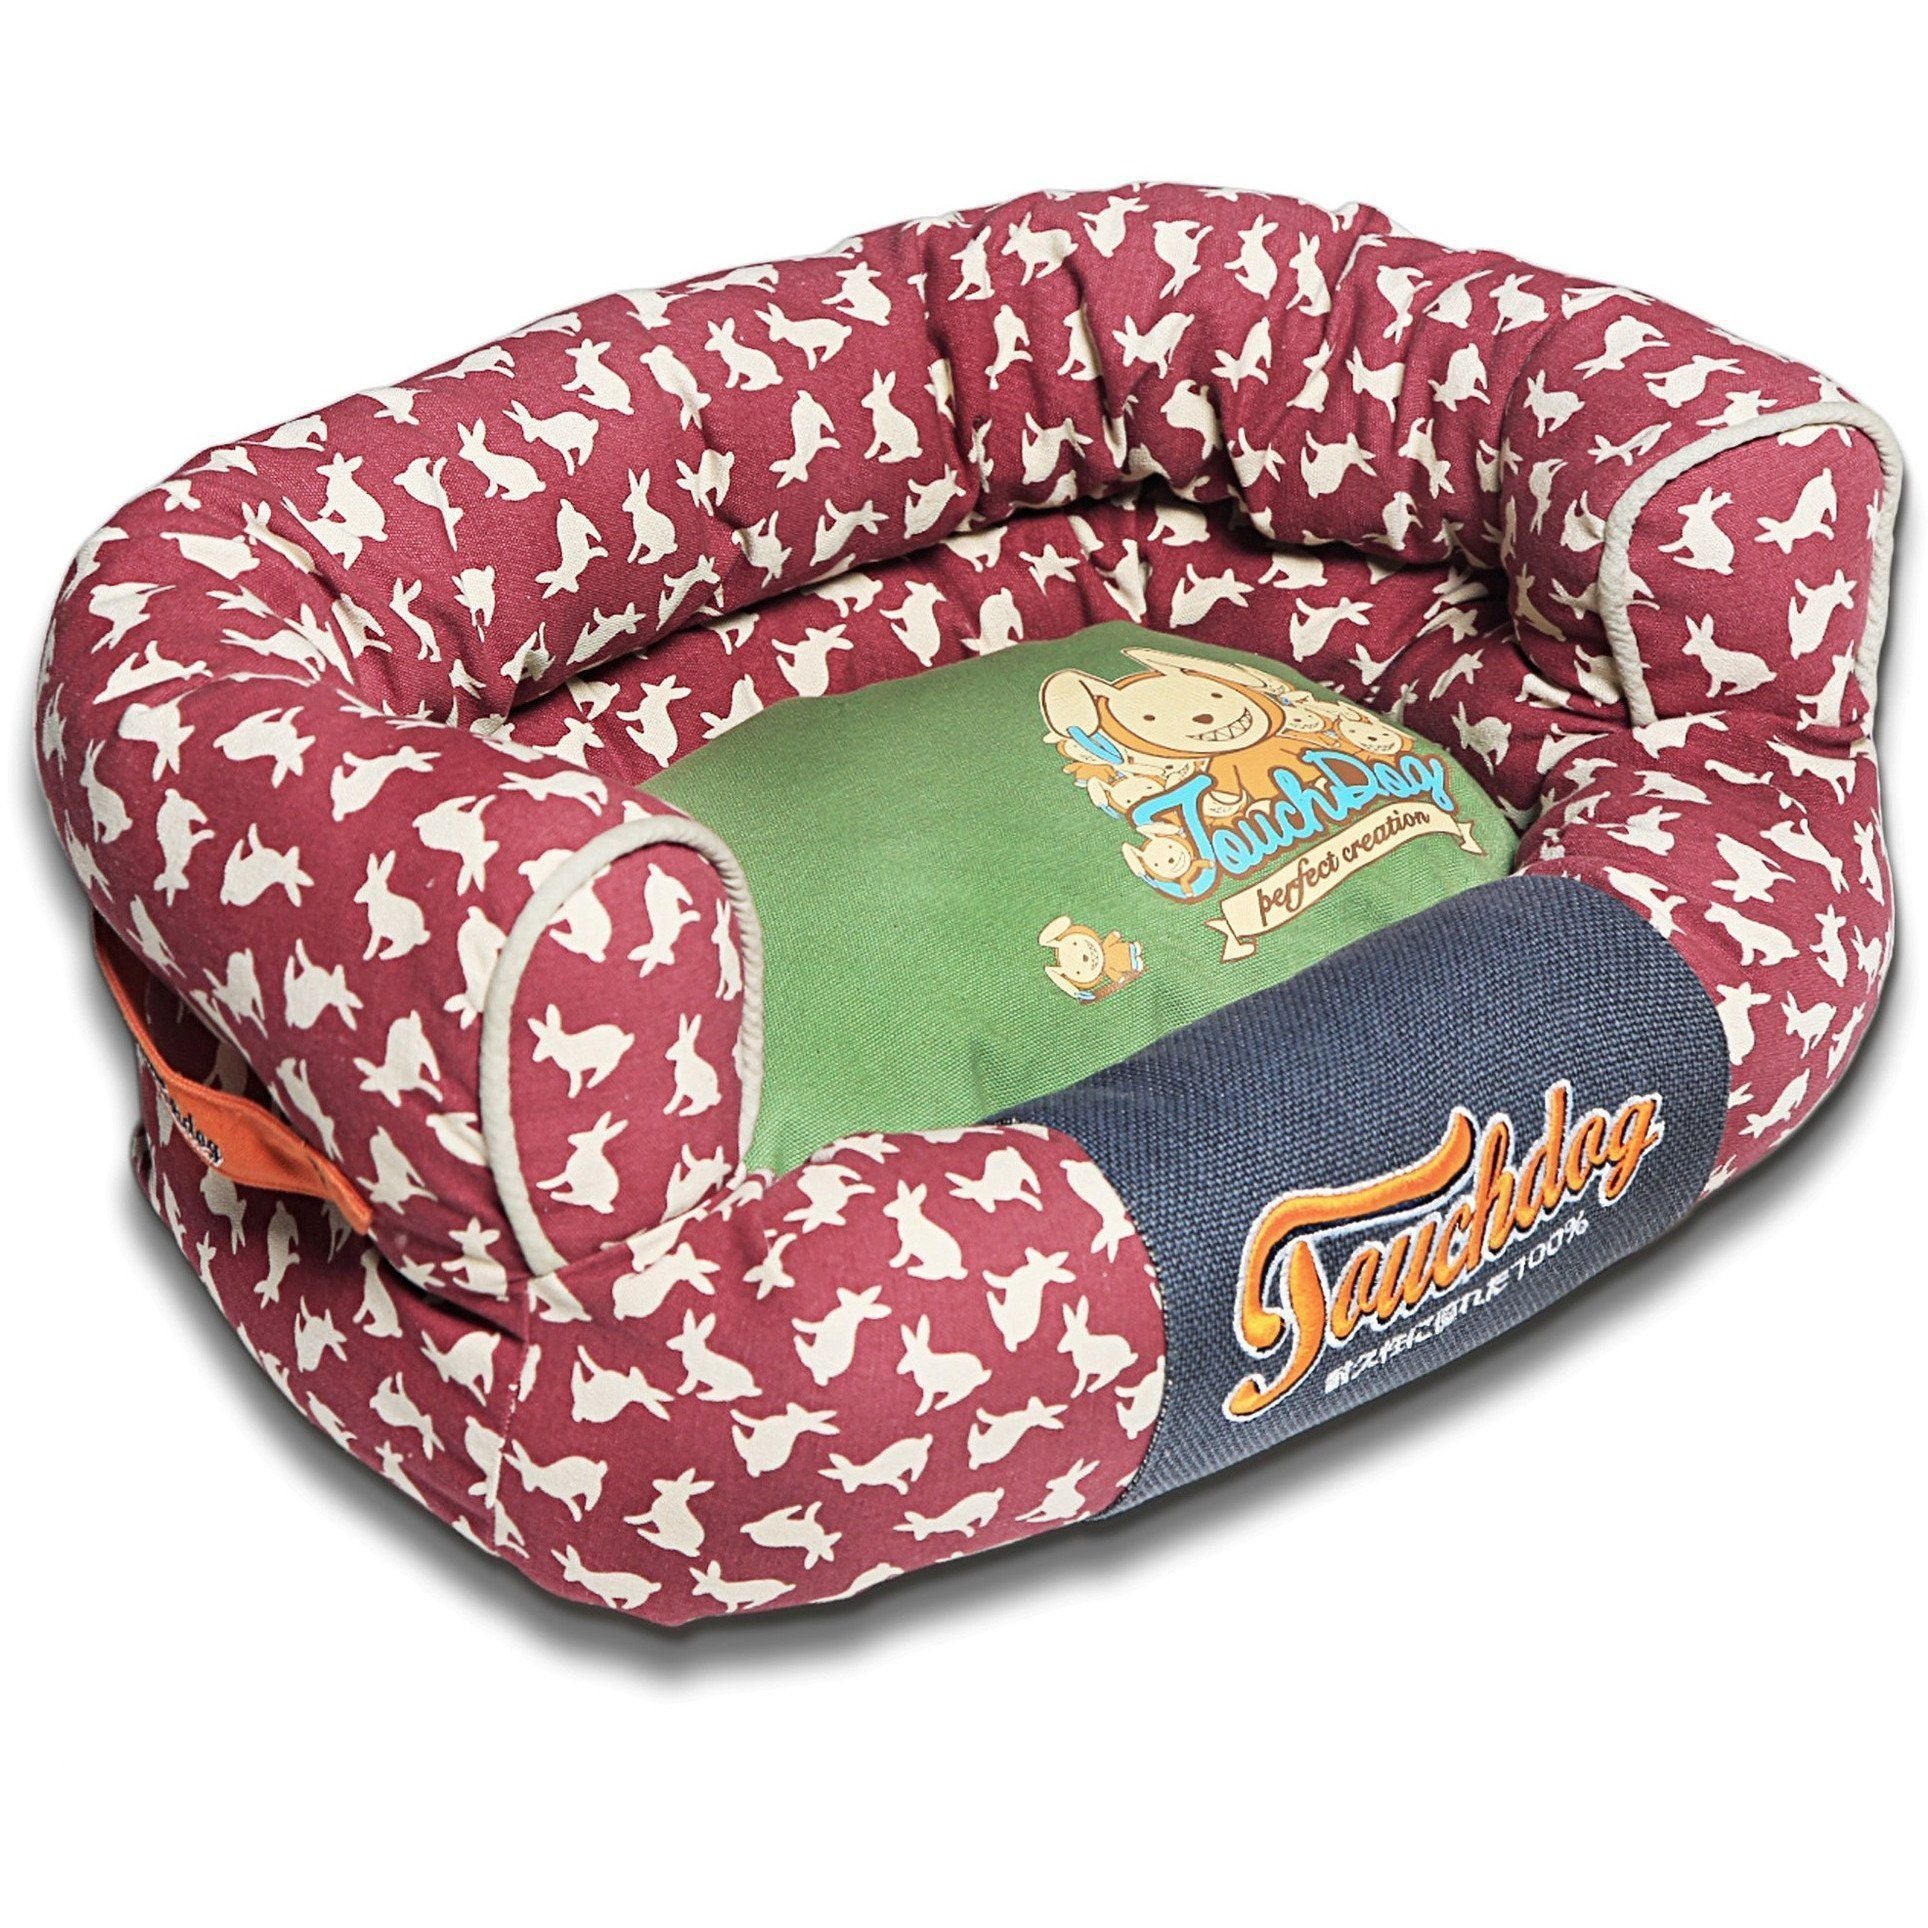 Touchdog ® 'Lazy-Bones' Rabbit-Spotted Designer Couch Dog Bed Medium Champaign Red, Olive Green